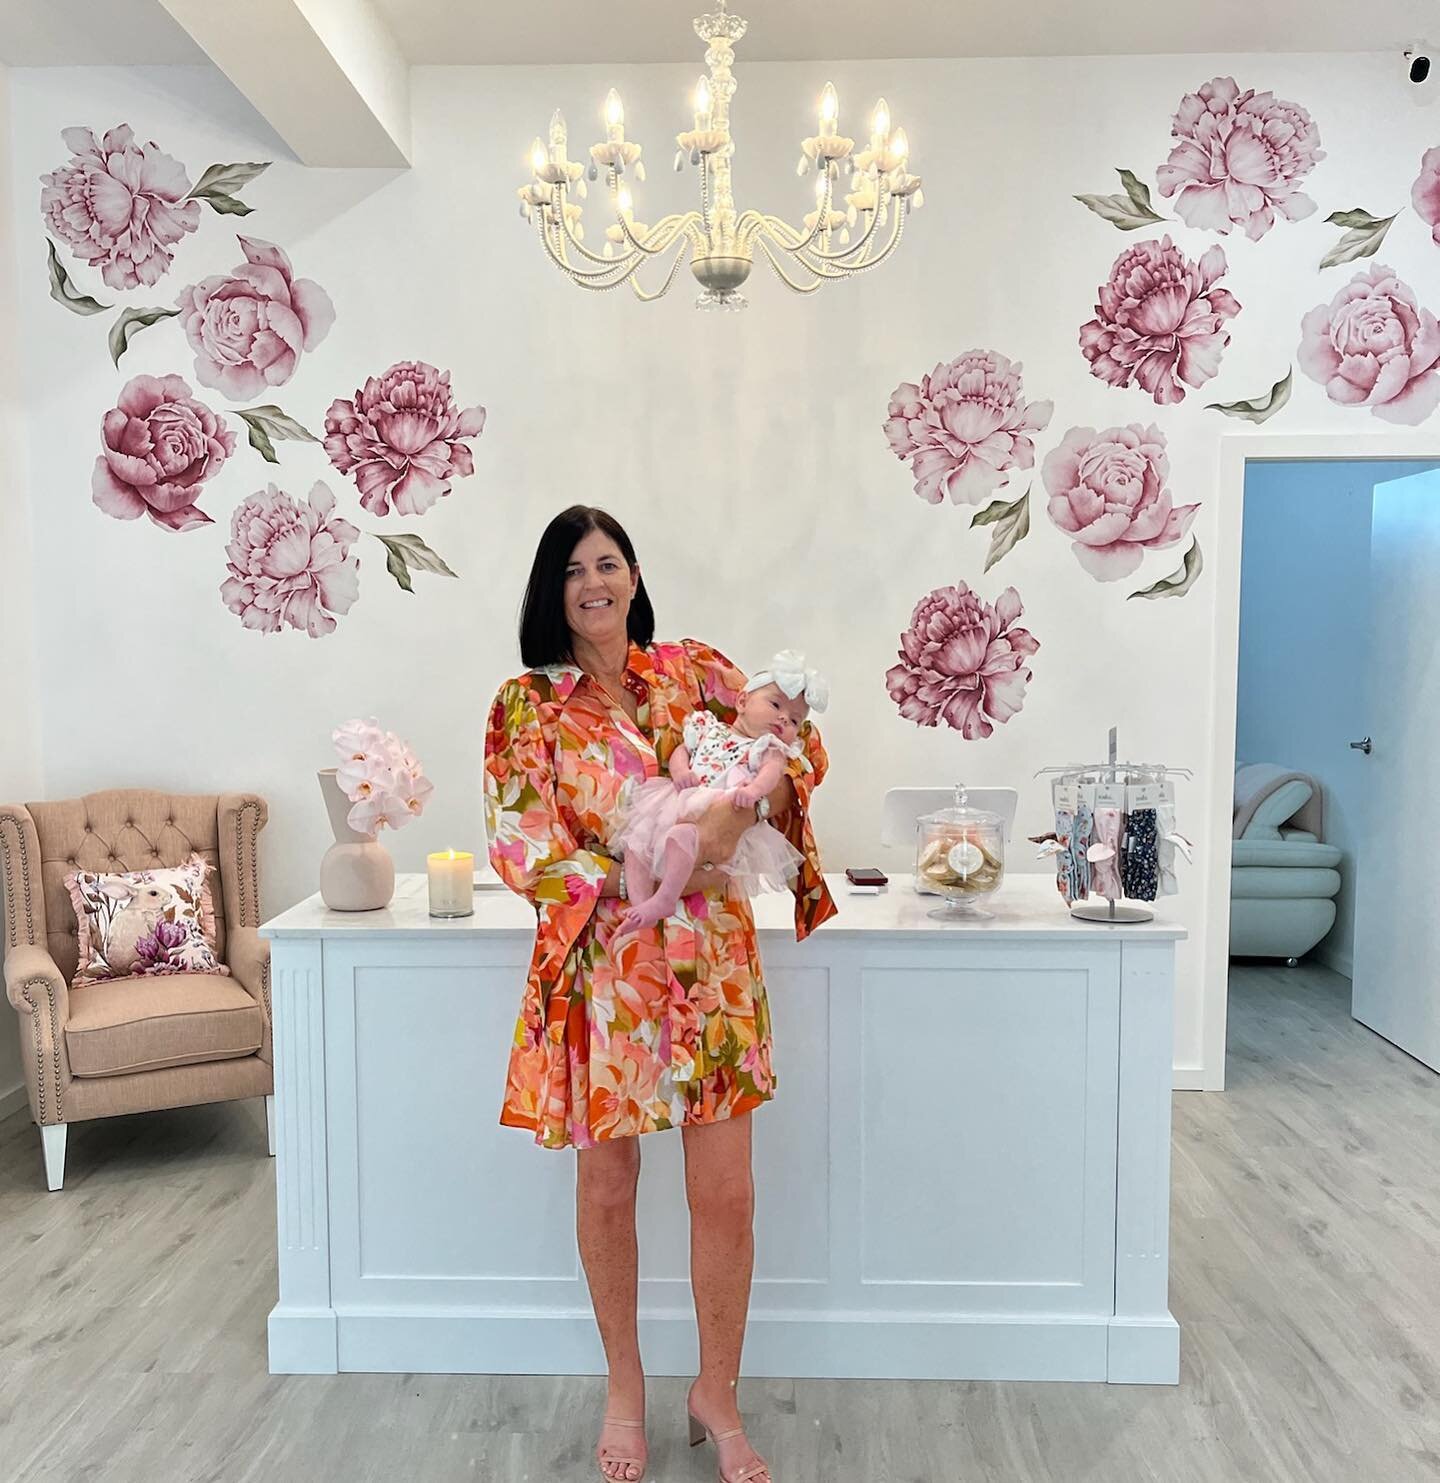 One year ago I took on the exciting adventure of opening a baby boutique in Caringbah. This past year has been more rewarding and challenging than I ever imagined, but I wouldn&rsquo;t change it for the world! I have enjoyed every single day spent he